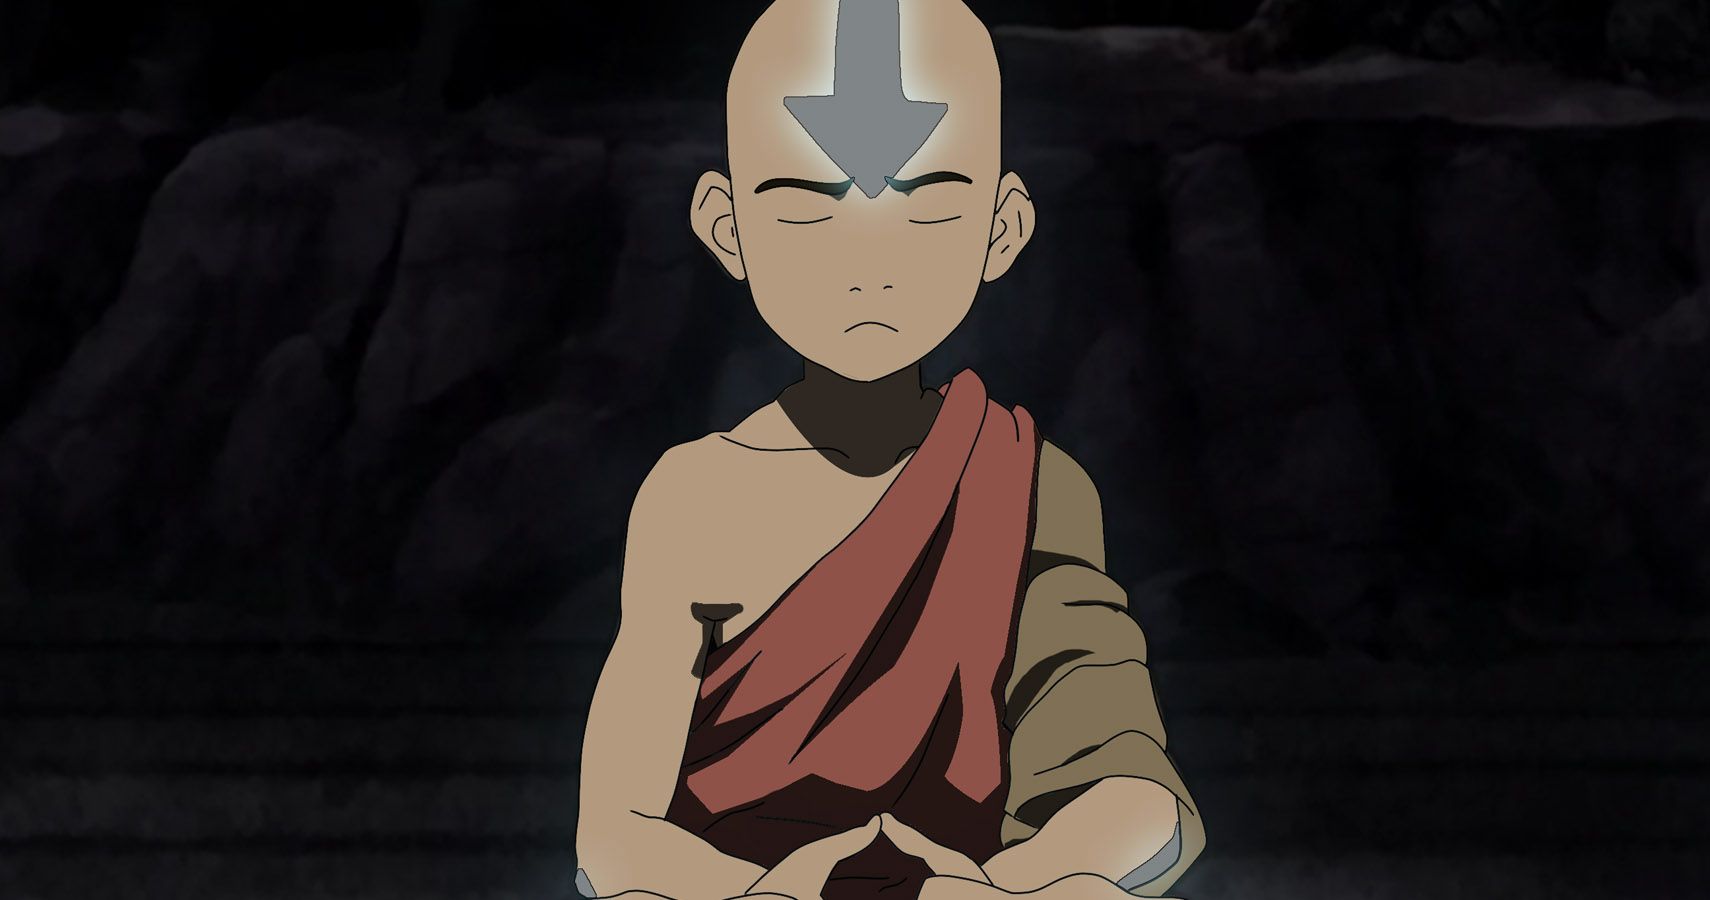 10 Anime Characters Who Are More Powerful Than Avatar Aang Sumber : www.cbr...